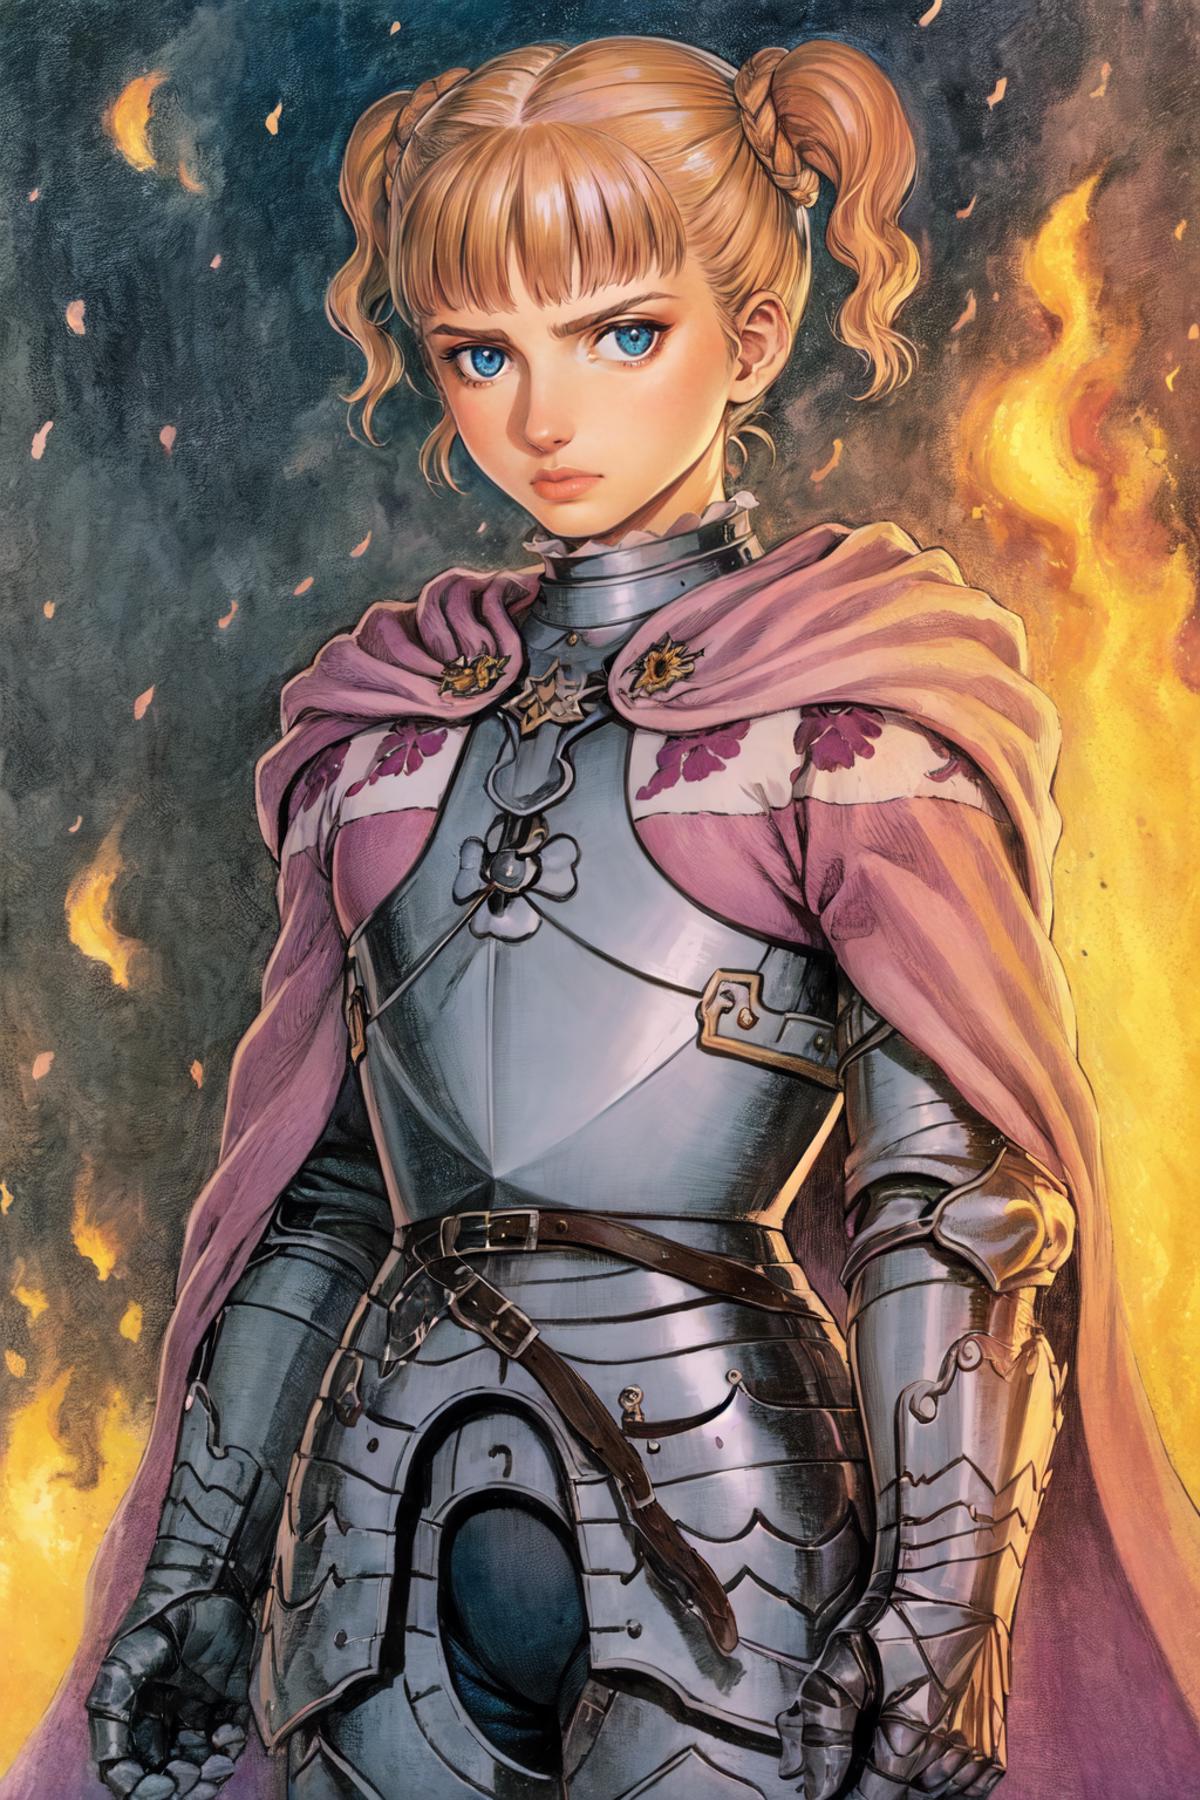 A woman wearing a pink armor and holding a sword.